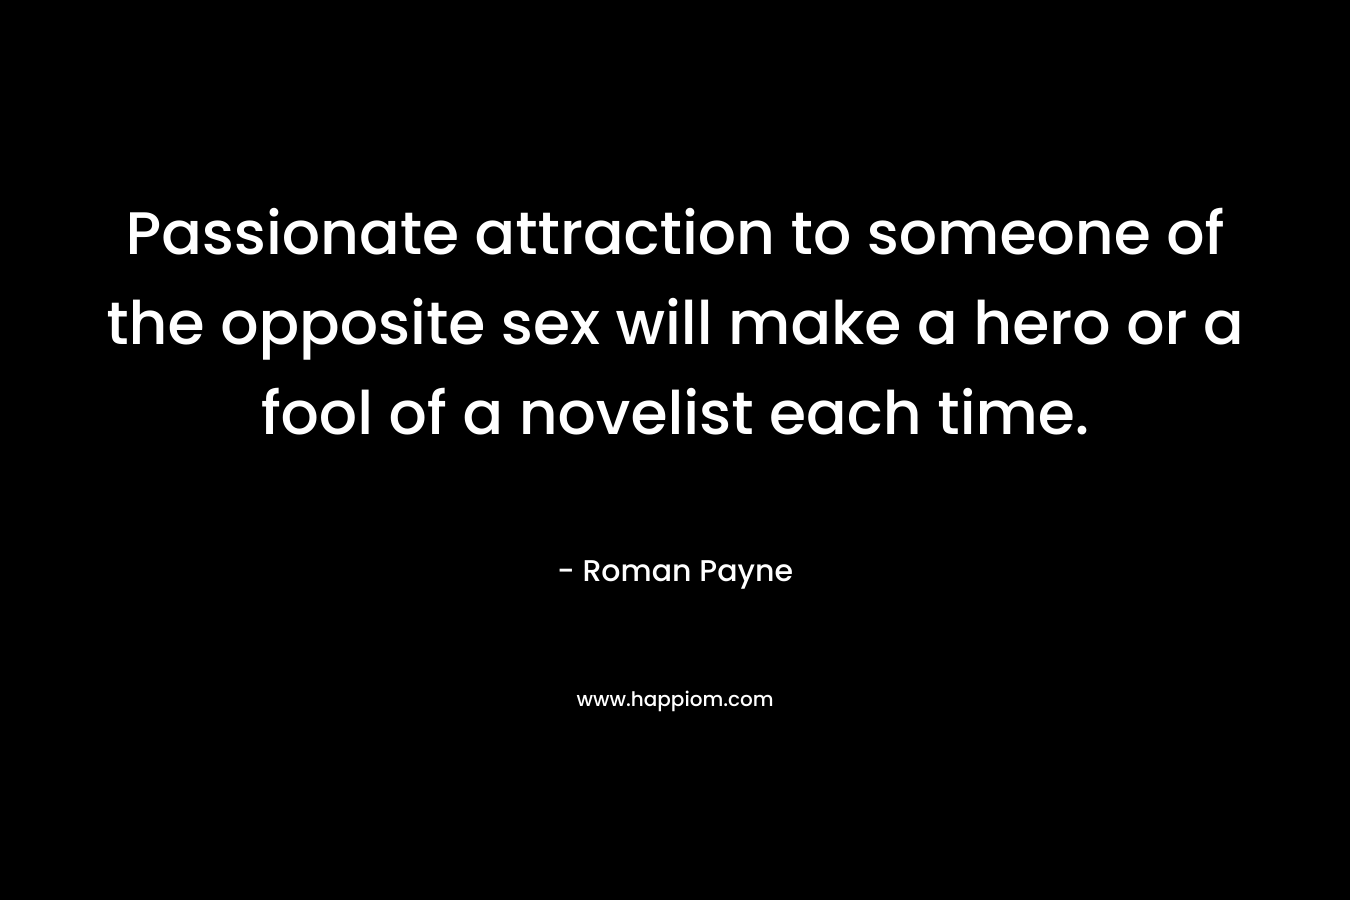 Passionate attraction to someone of the opposite sex will make a hero or a fool of a novelist each time.